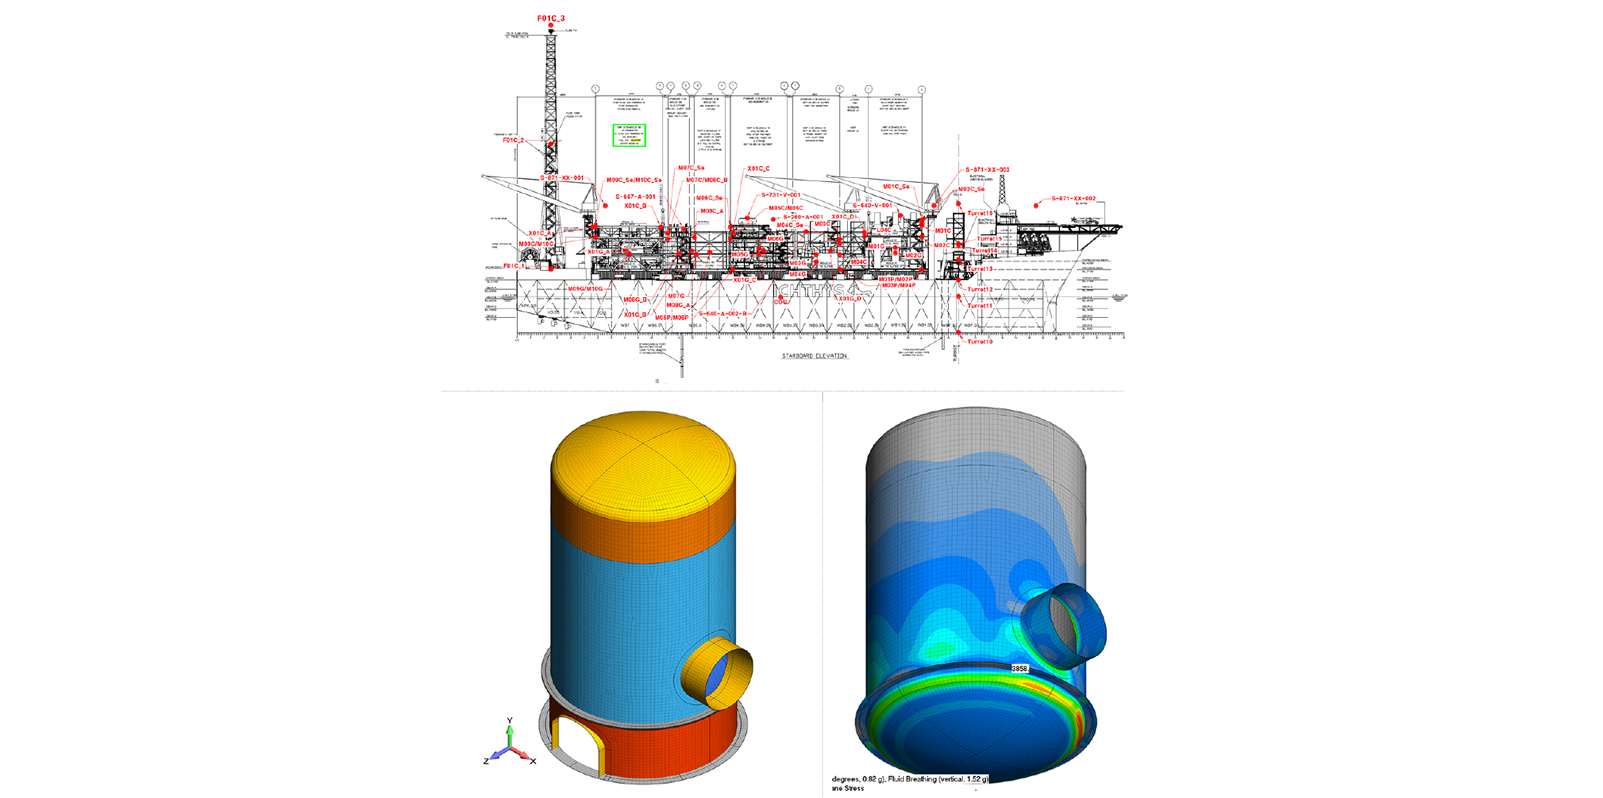 The sloshing analysis was performed to meet ship-board specifications per S930-AS-CAL-10007 with the work tied to ASCE 4-98.  The pressure vessel was built in Femap and then prepared for SPH sloshing analysis using LSTC LS-PrePost.